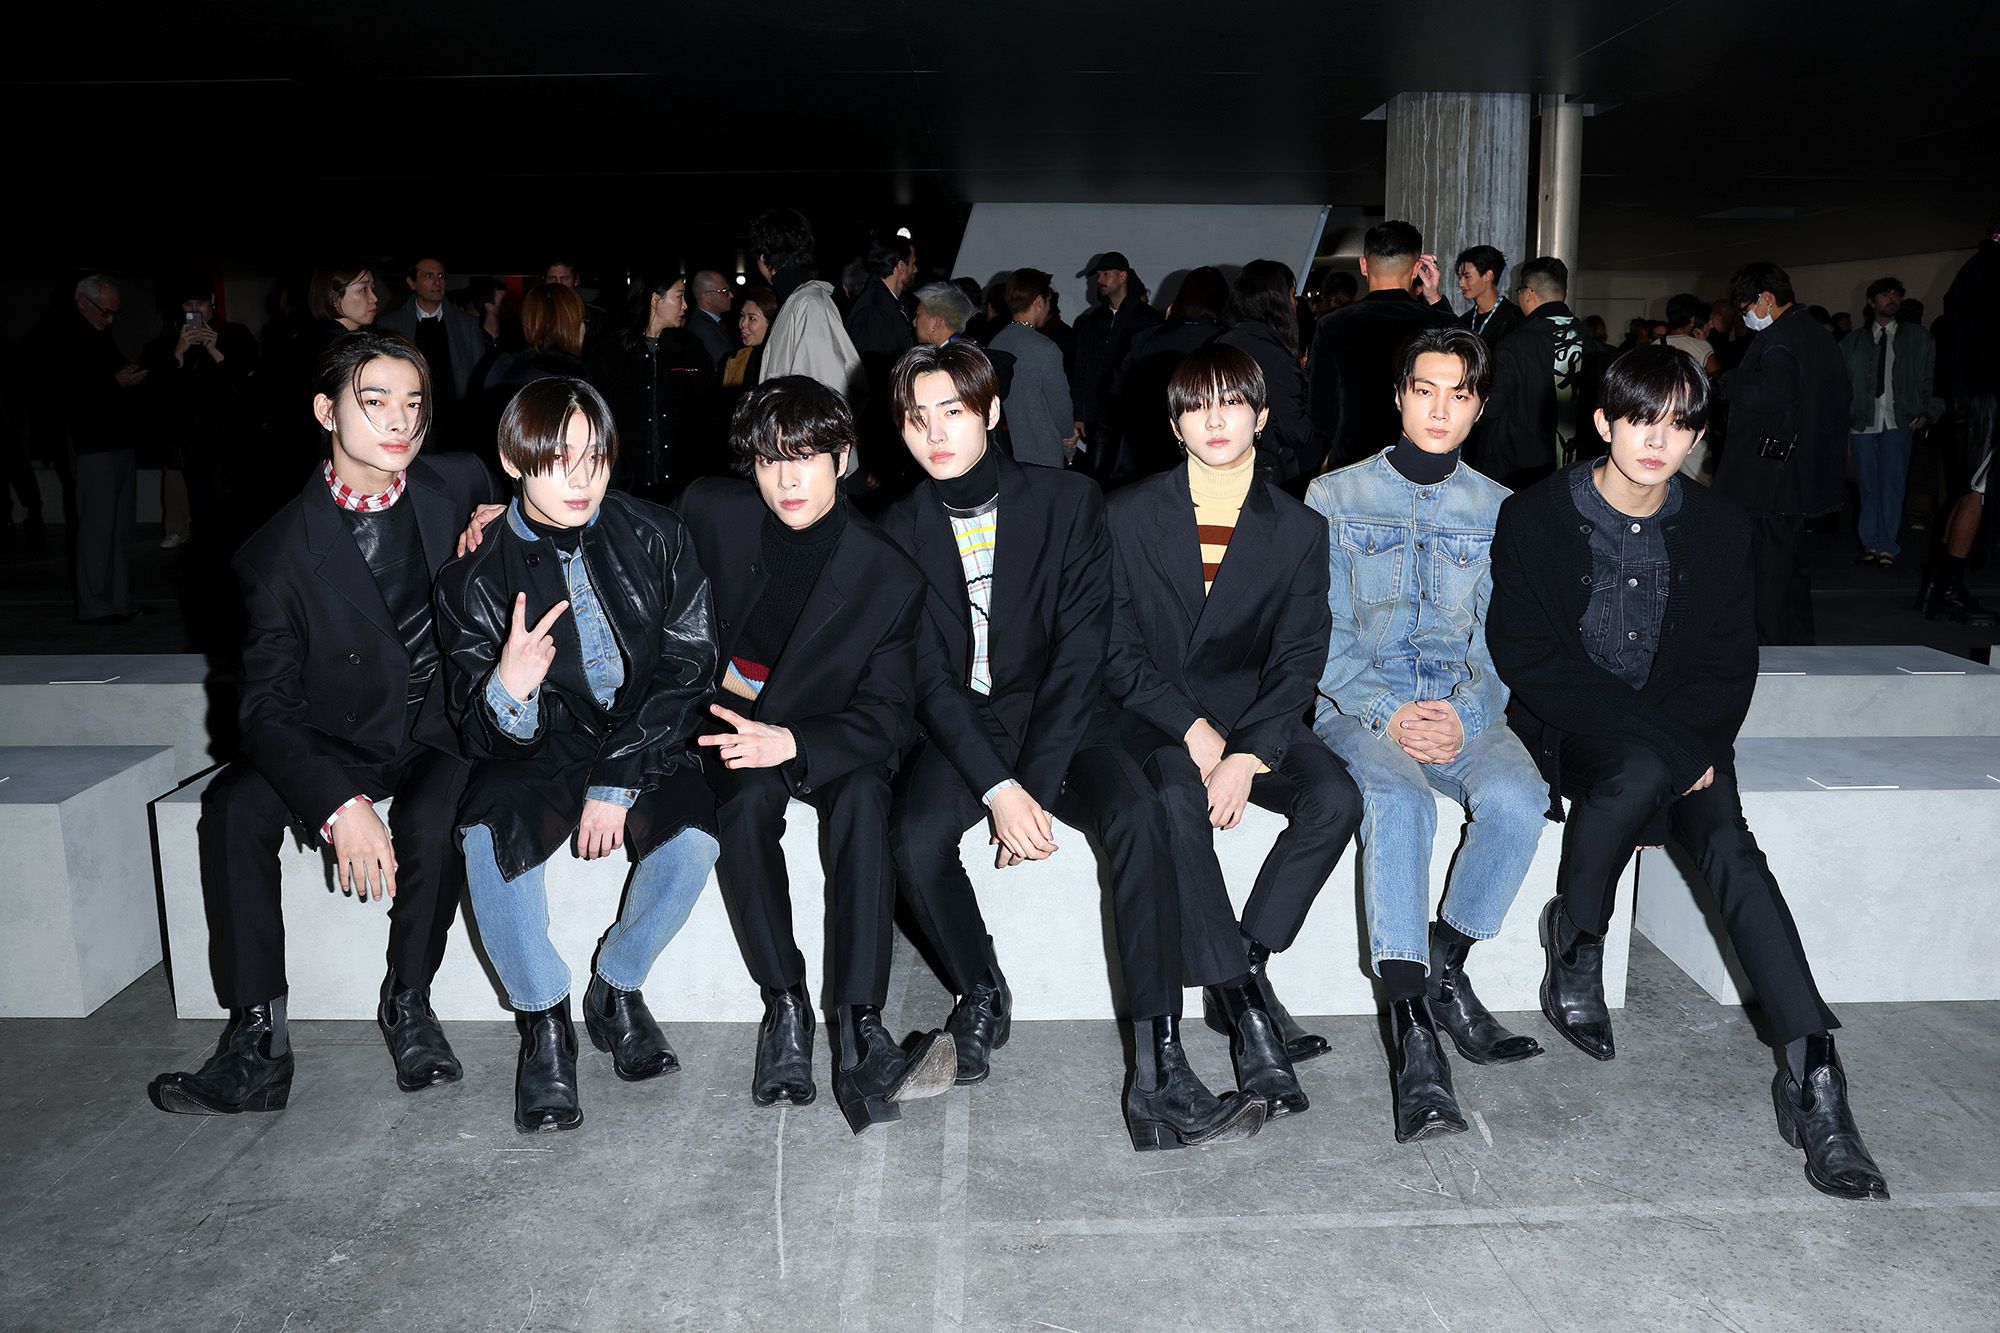 Louis Vuitton Presents Its Men's Fall/Winter 2021 Spin-Off Show in Seoul  with BTS